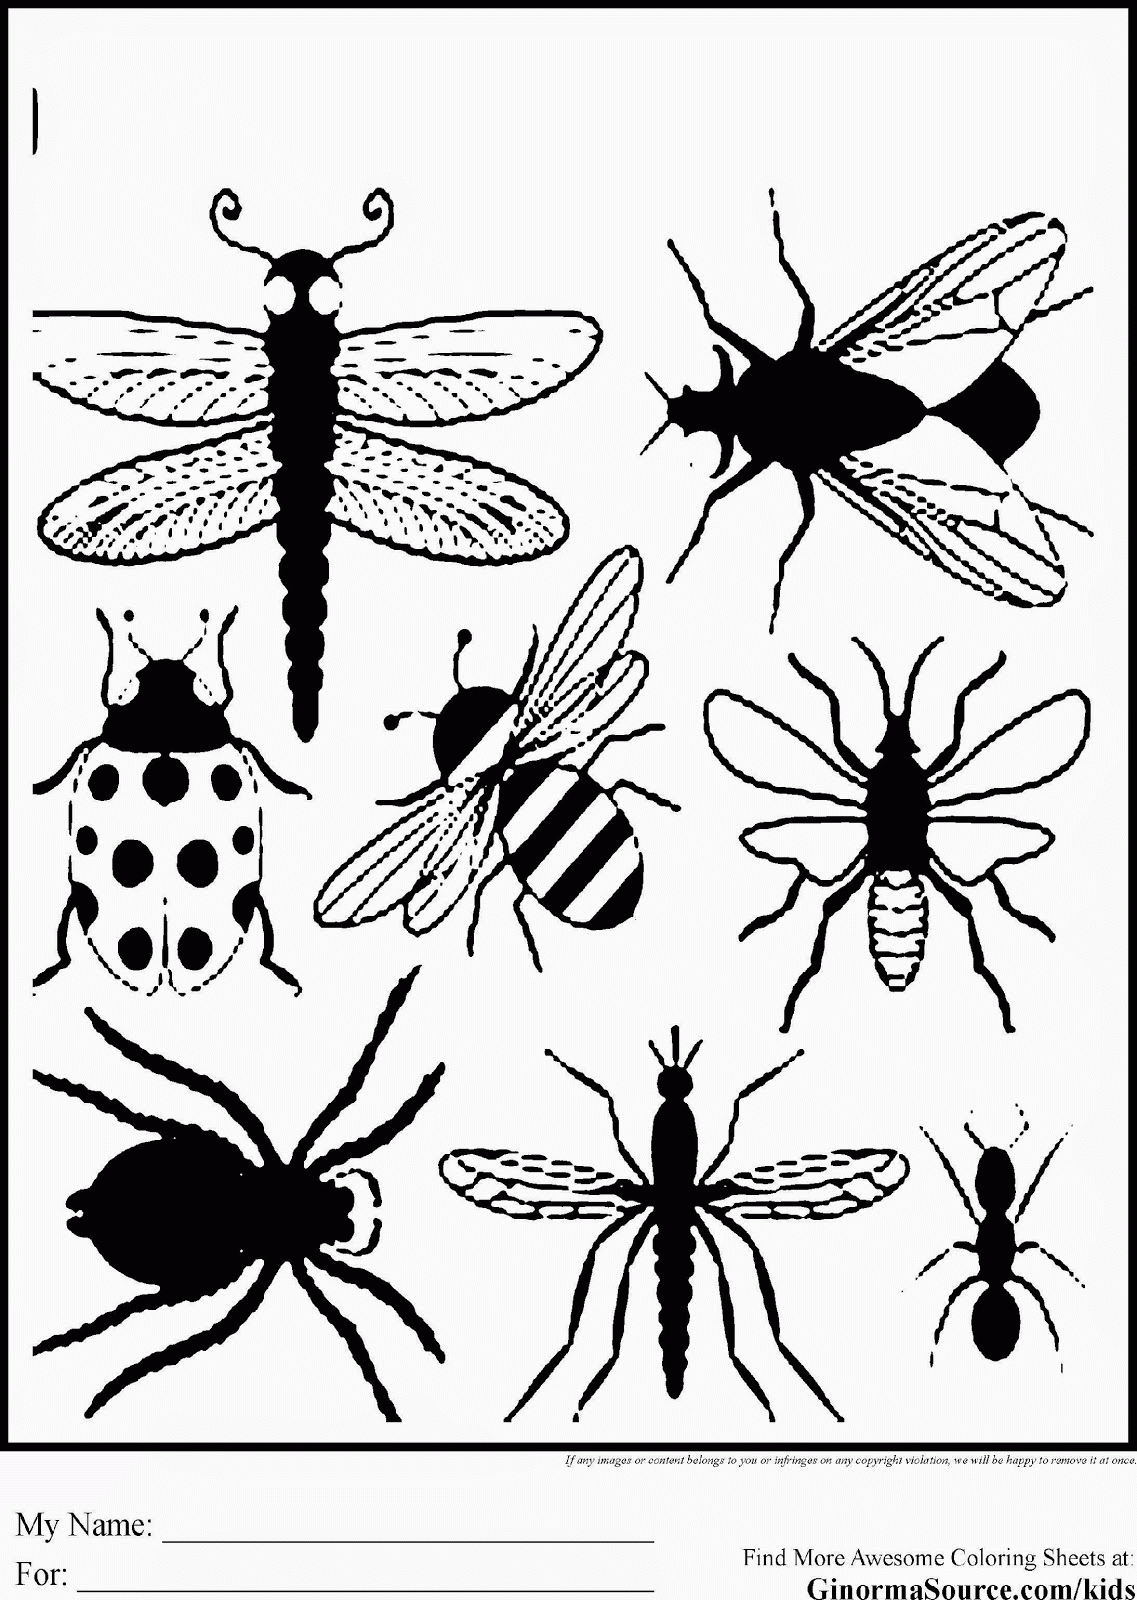 New Insect Coloring Sheets Free Coloring Sheet   Widetheme ...